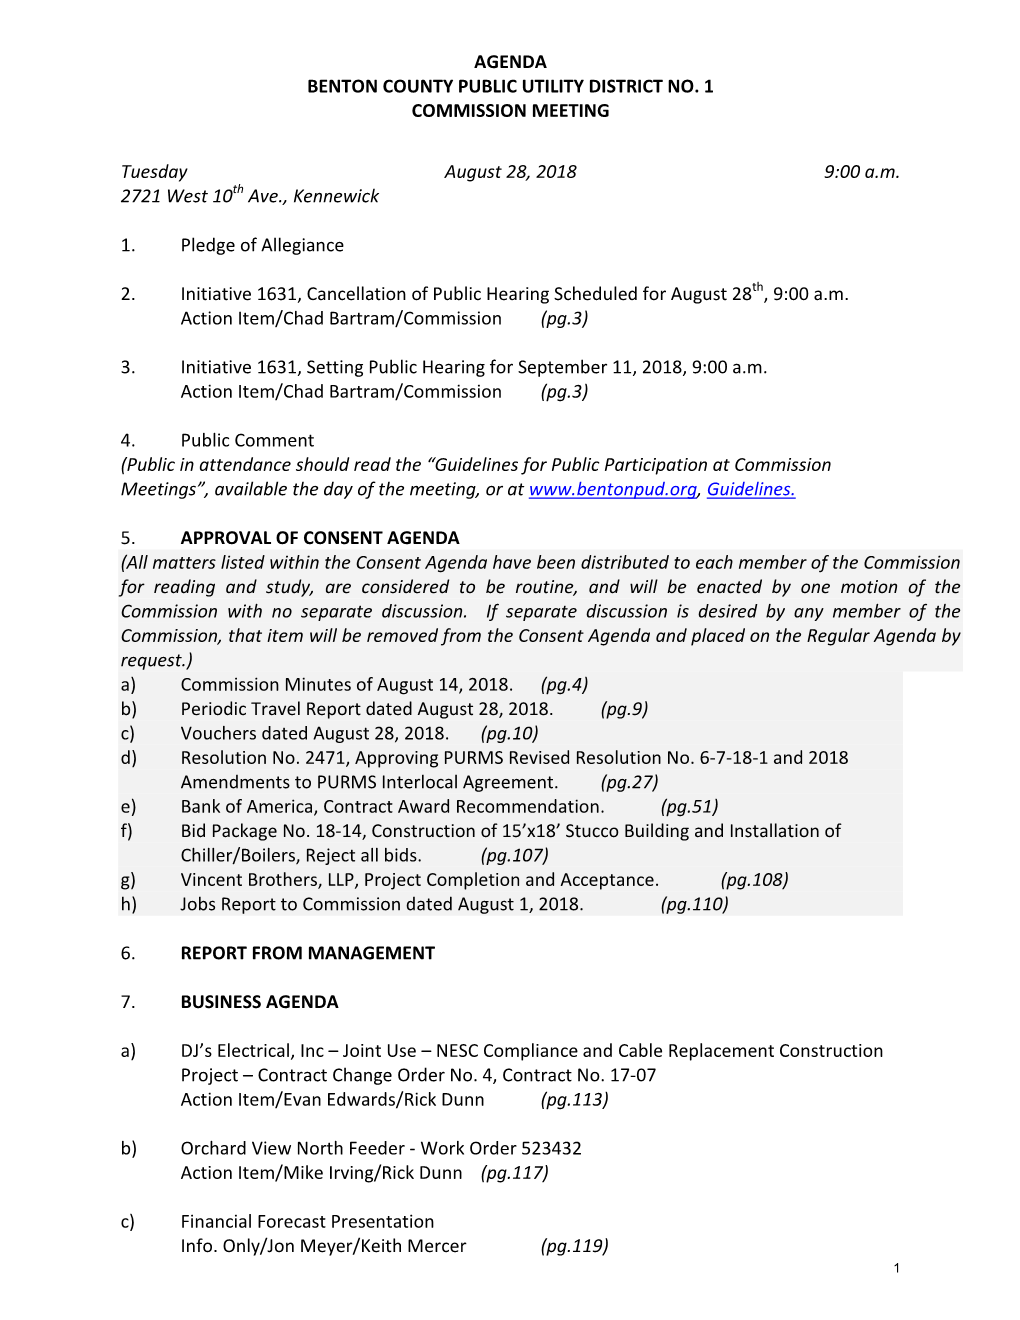 AGENDA BENTON COUNTY PUBLIC UTILITY DISTRICT NO. 1 COMMISSION MEETING Tuesday August 28, 2018 9:00 A.M. 2721 West 10Th Ave